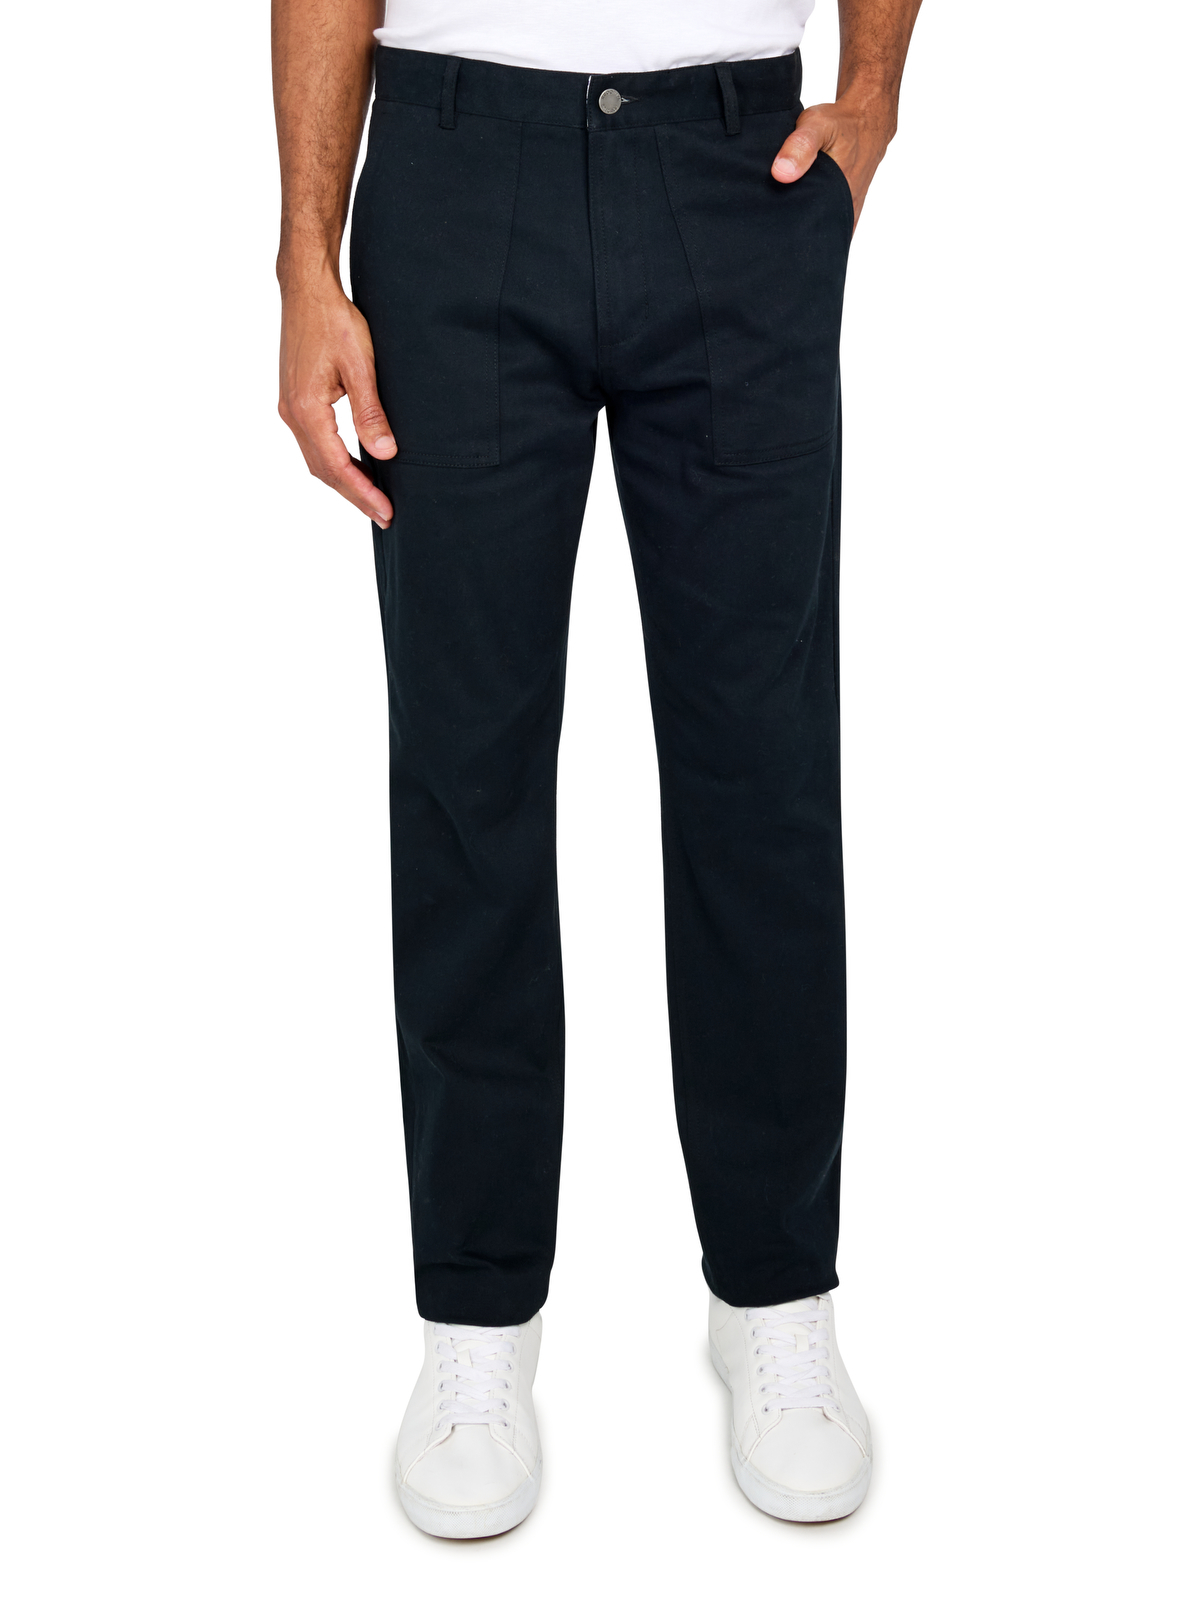 SOLID UTILITY PANTS